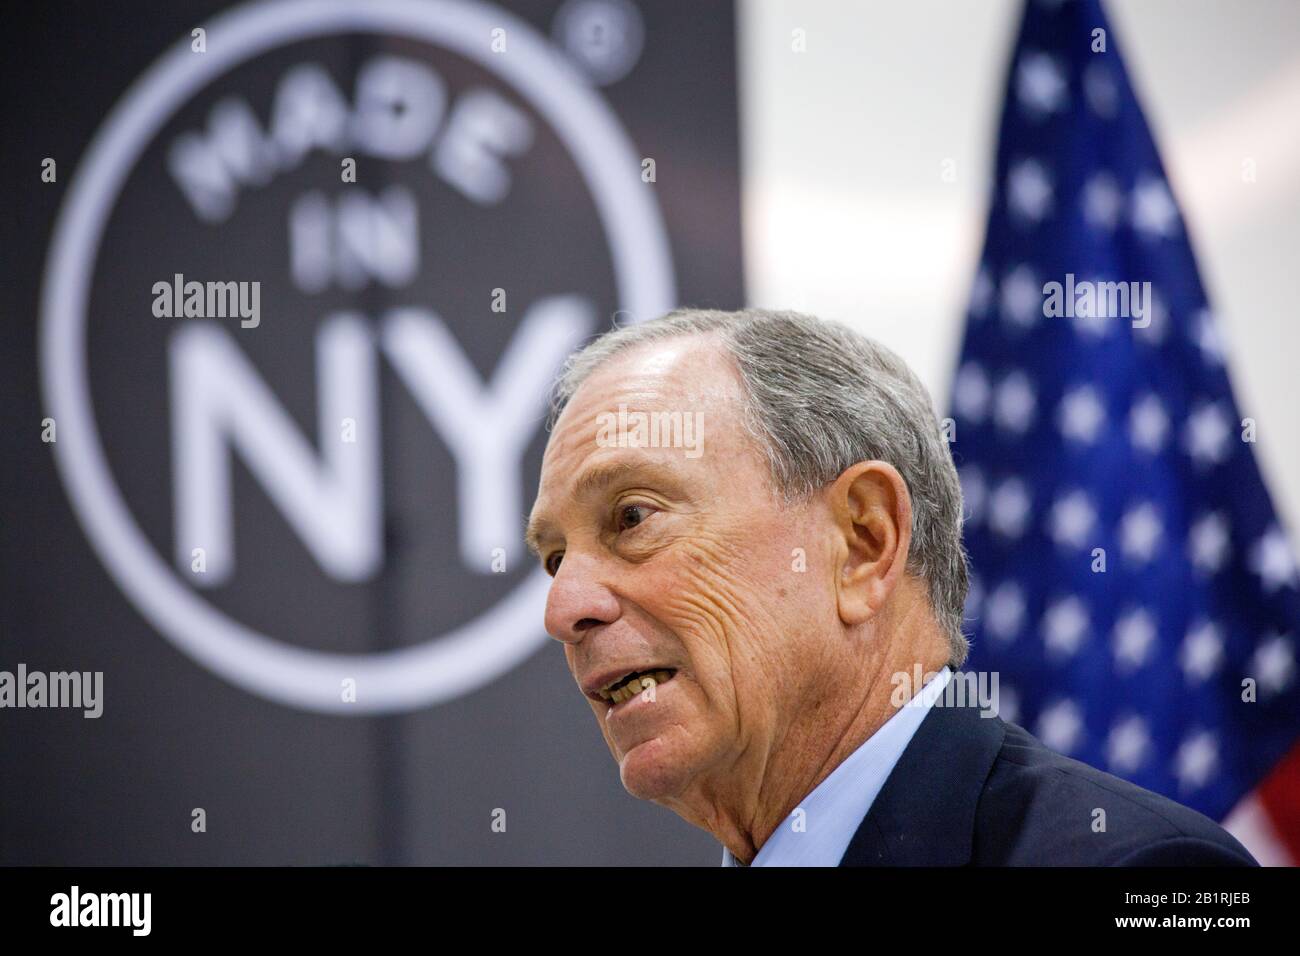 New York City mayor Michael J. Bloomberg at the opening of the new Steiner Studios in Brooklyn Navy Yard. New York has always had a thriving movie industry, but in tough competition with cities on the west coast and in Canada. Behind him is a new trademarked logo with the words 'Made in NY'. Stock Photo